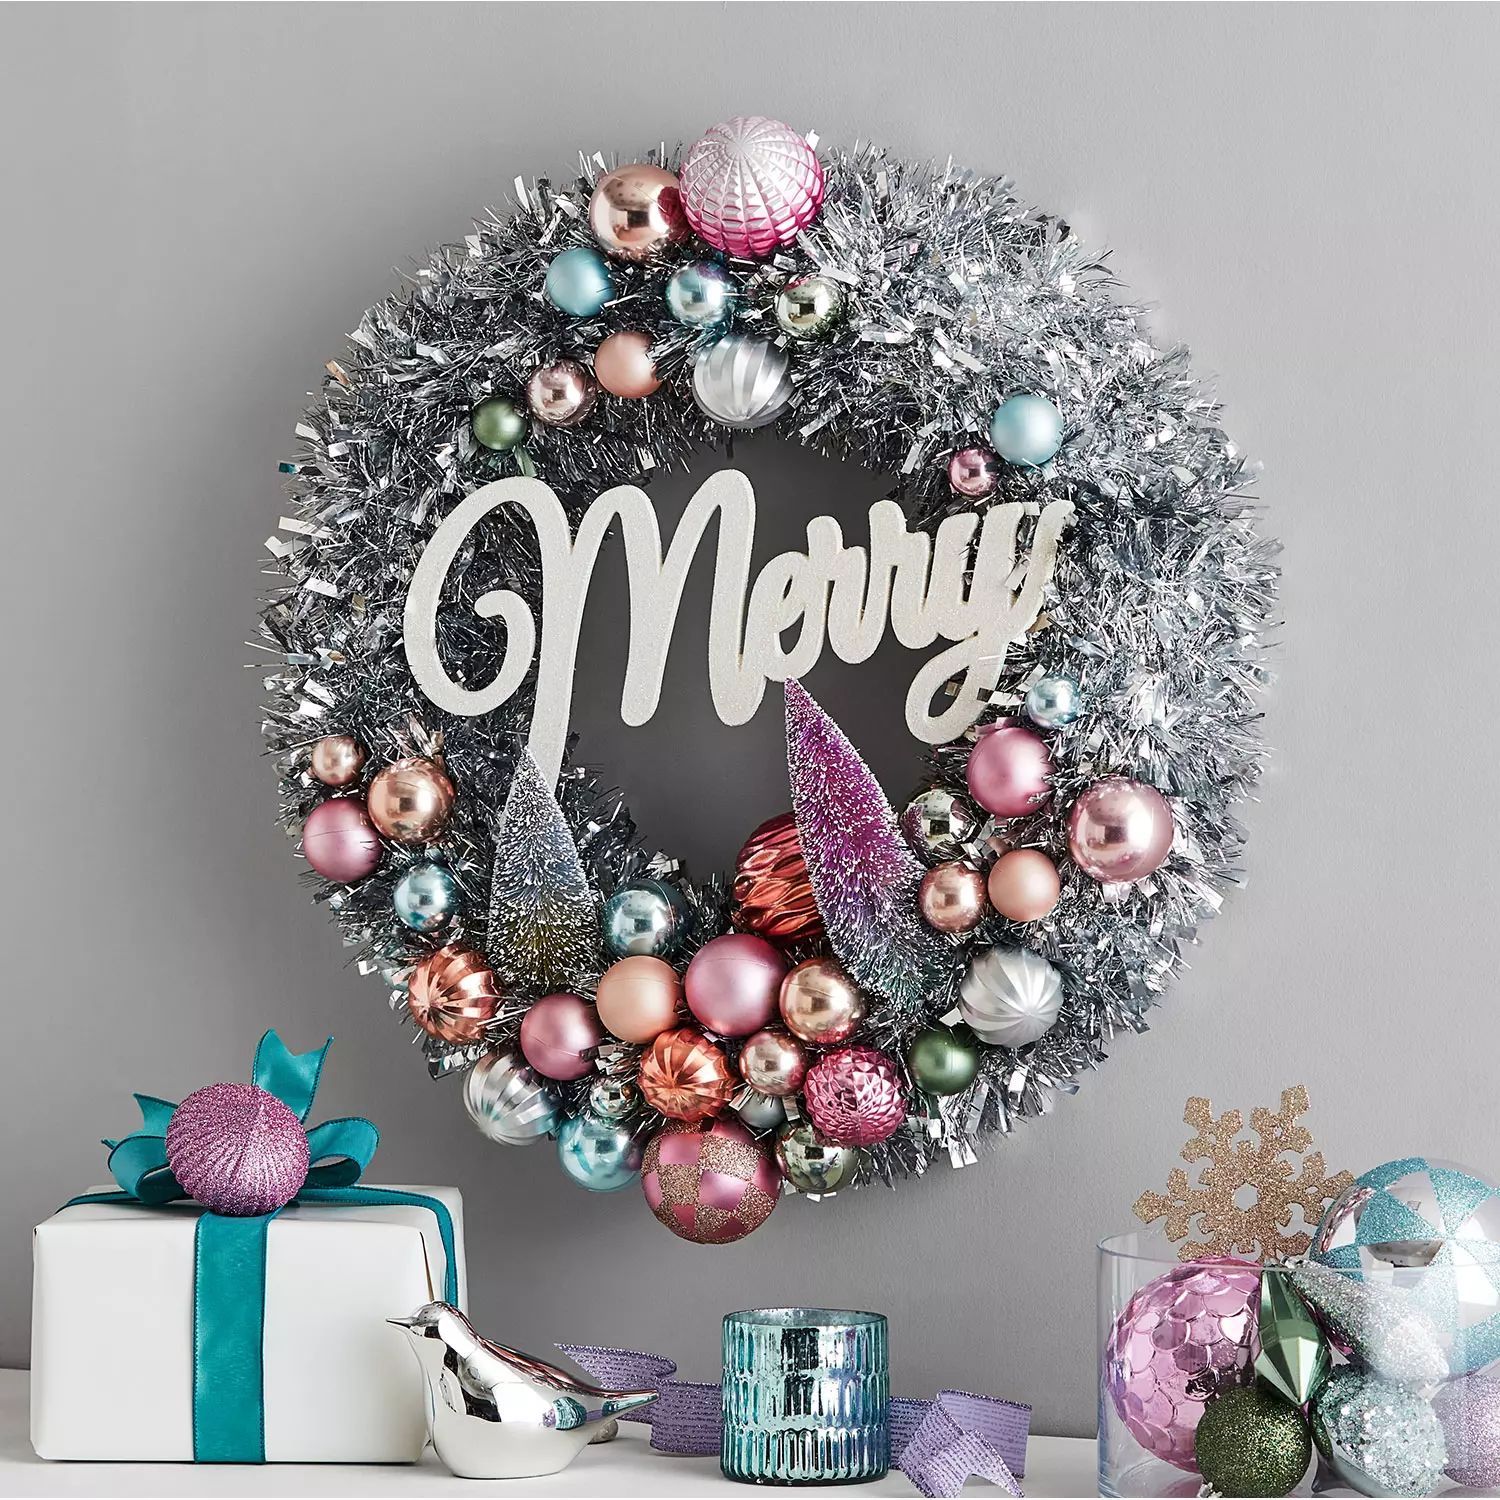 Member's Mark 24" Shatterproof Ornament Tinsel Wreath - Pink and Silver | Sam's Club